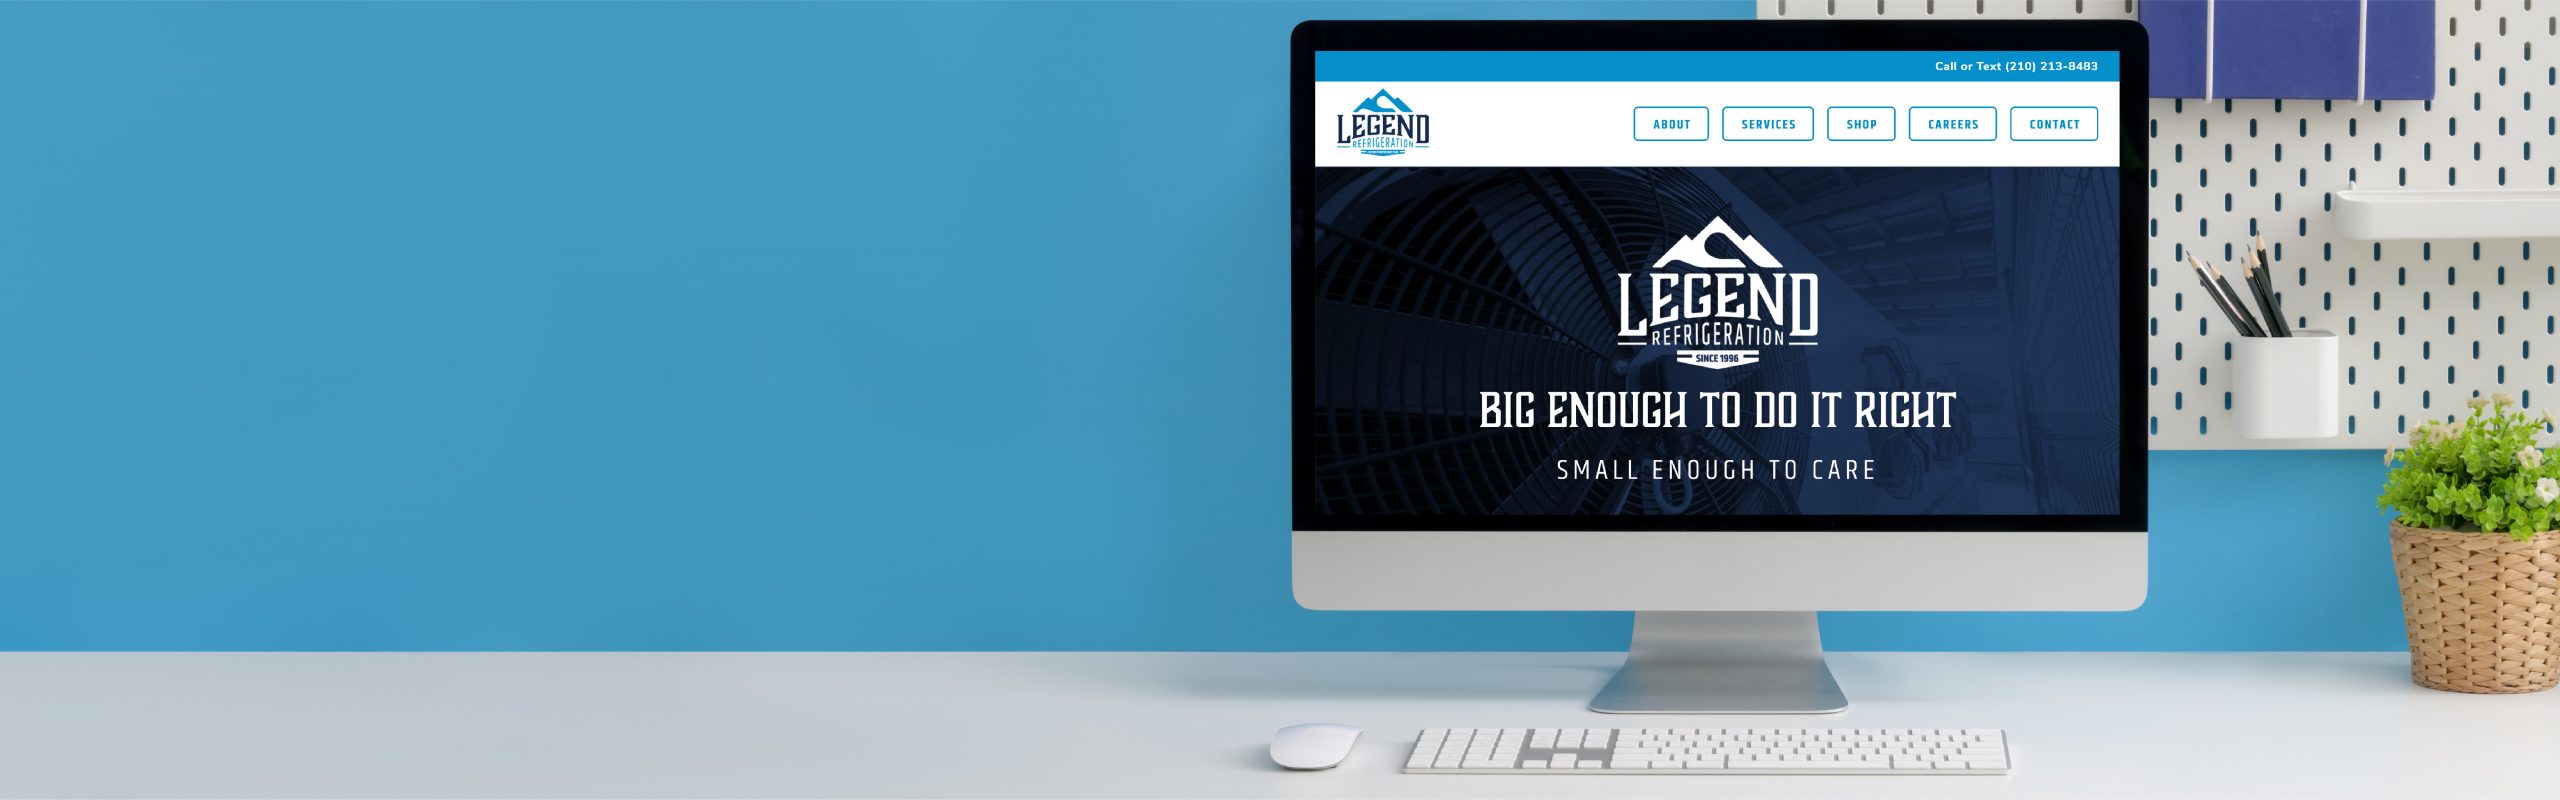 A desktop computer placed on a white table displaying the homepage of a company named "Legend Refrigeration" on its screen, with a slogan that says "big enough to do it right small enough to.